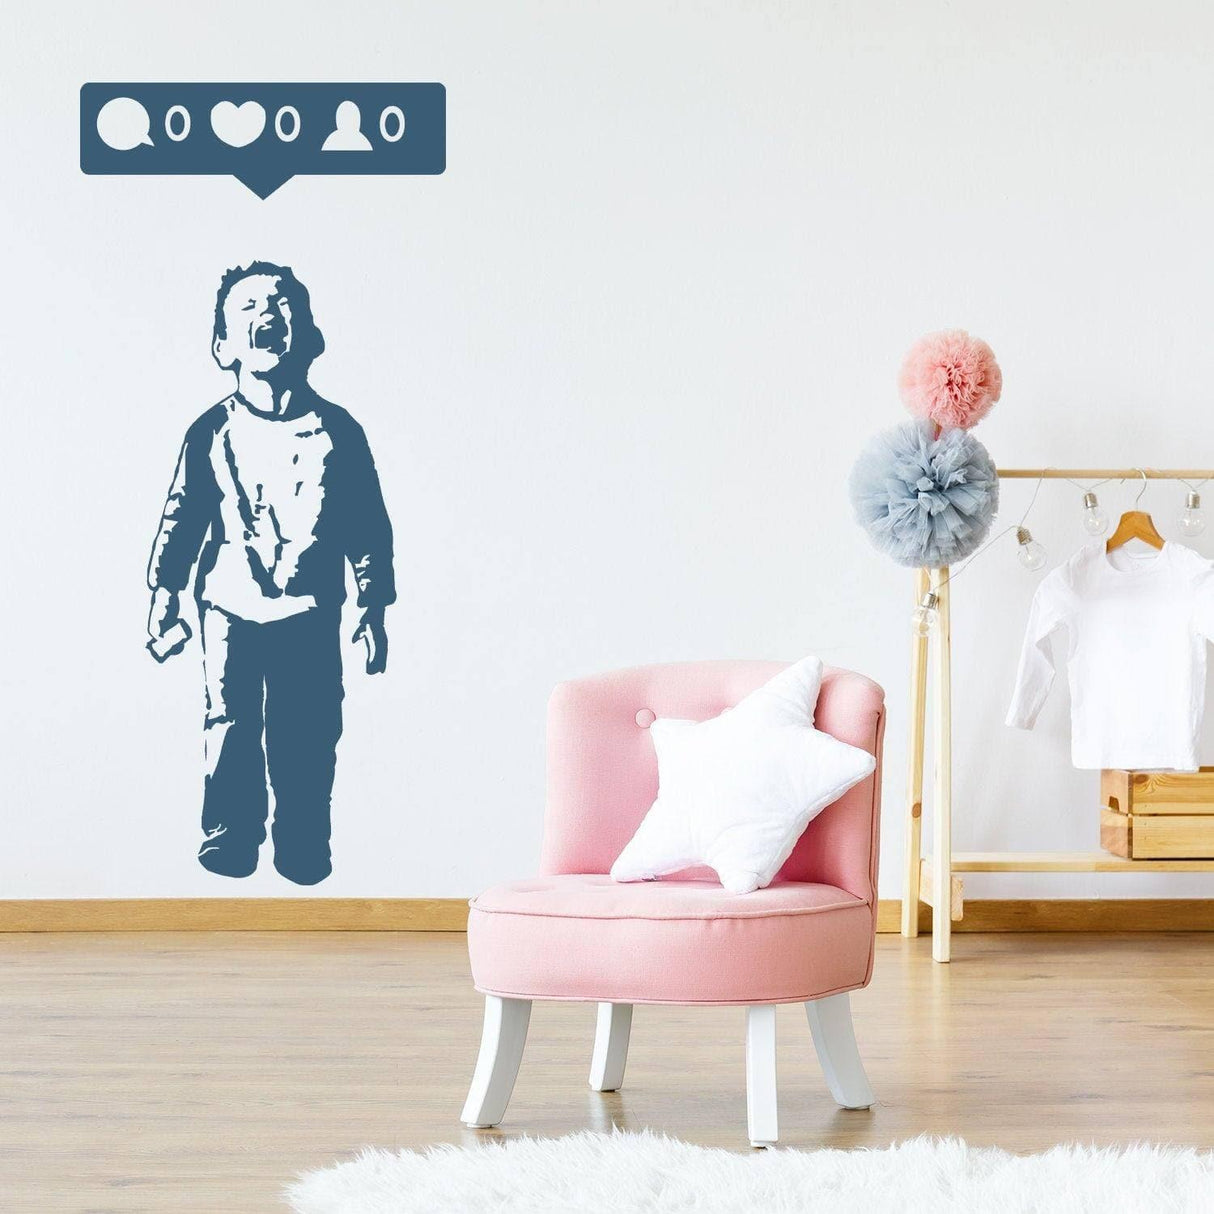 Crying Boy With Cellphone Banksy Wall Sticker - Facebook Phone Gift For Party Mac Decal - Sign Street Art Face Friend Cell Book Mural - Decords